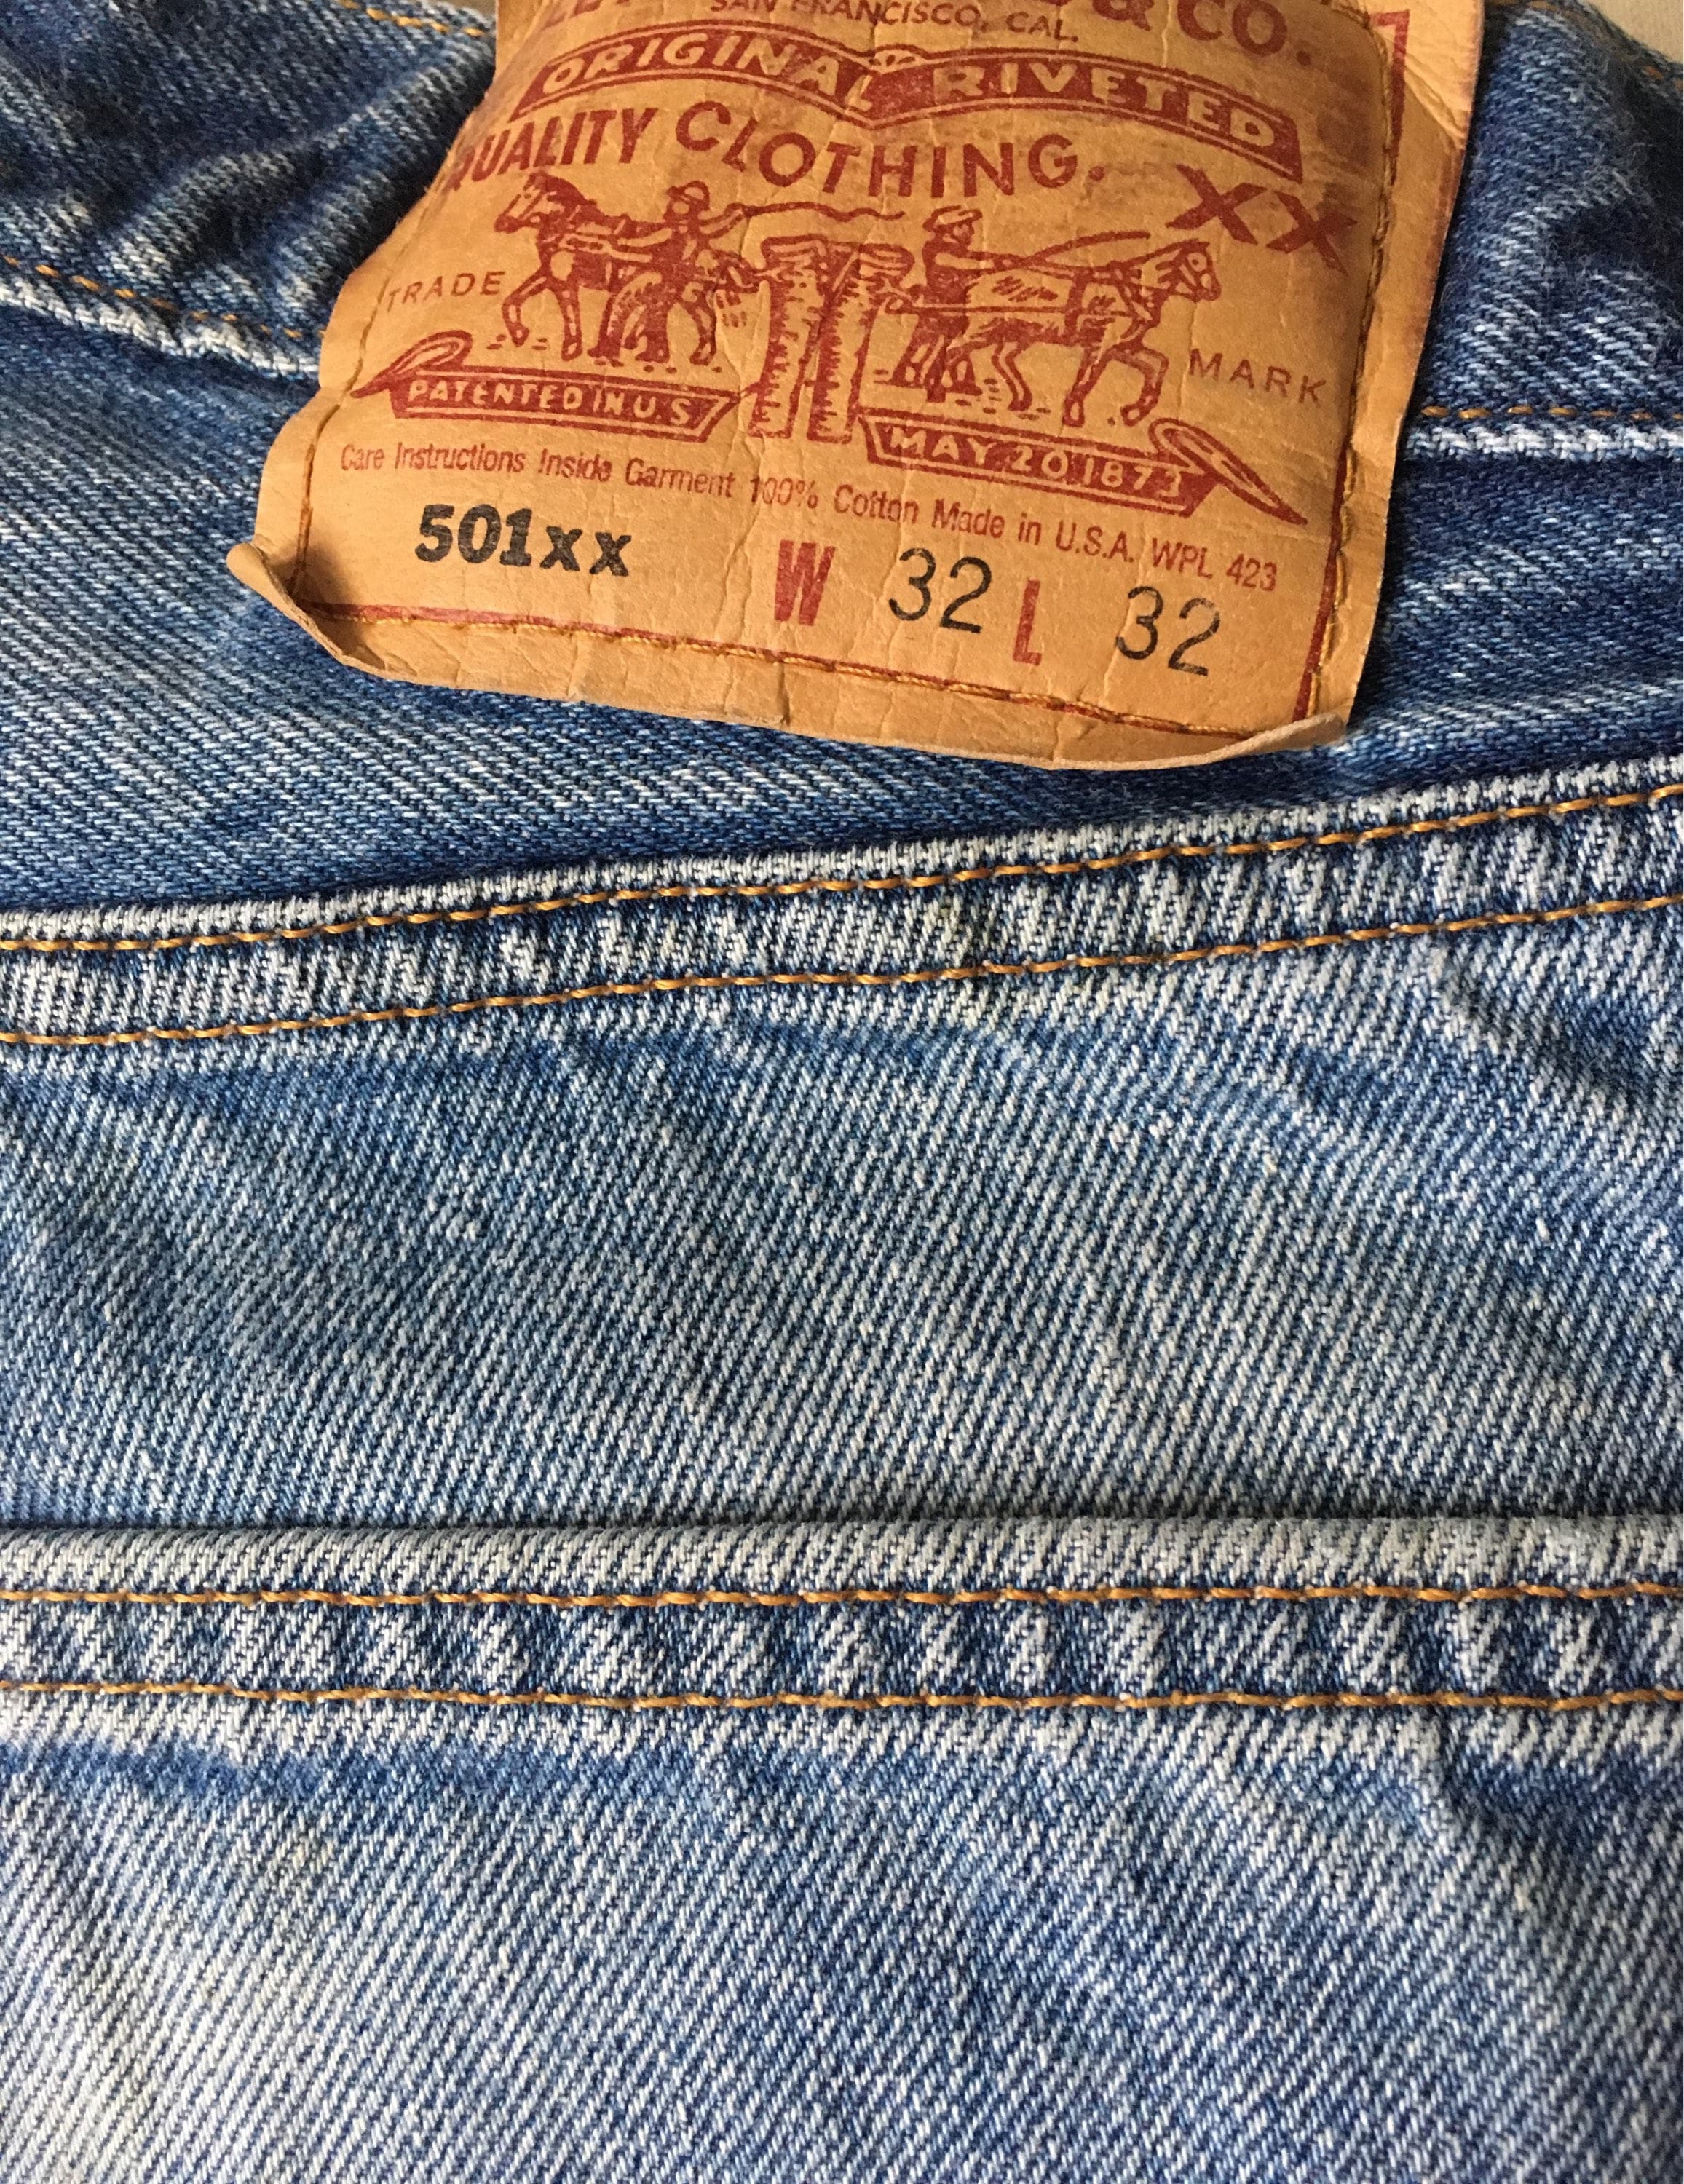 Vintage Levi's 501 Red Tab Men's Denim Jeans 501xx with Button Fly